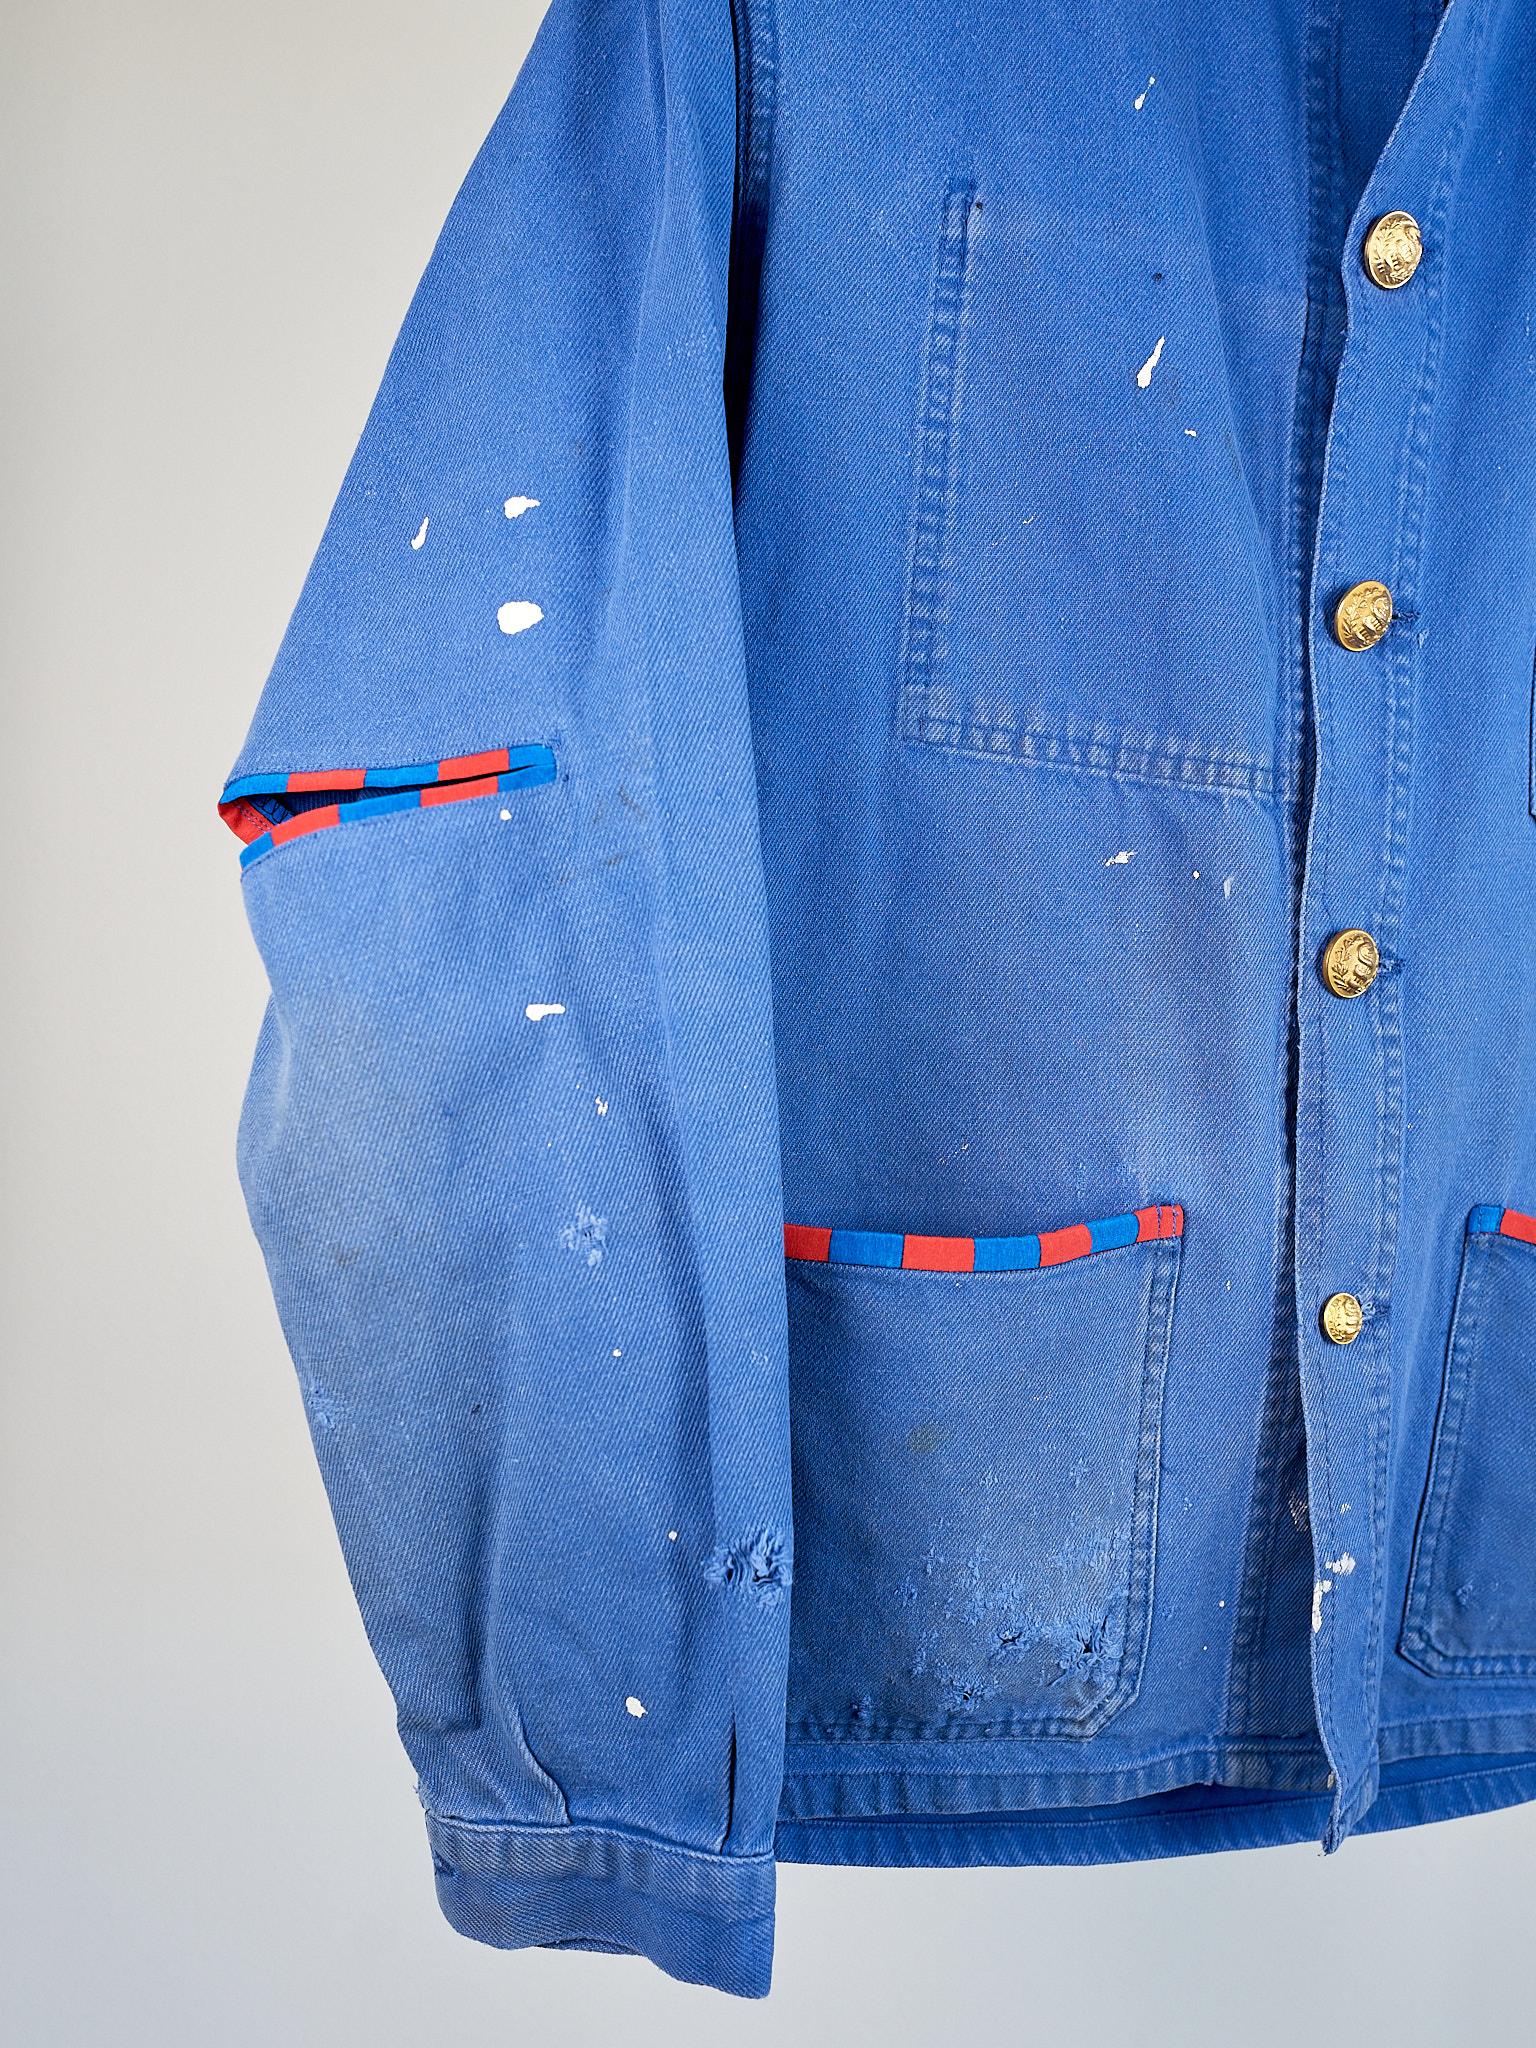 French Work Wear Jacket Distressed Cobalt Blue with some Original Paint Stains, Silver Bullion Fringes, Red Blue Square Silk Reinforcement pockets and open Elbows White Silk Collar

Brand: J Dauphin
Size: Medium 
100% Sustainable Luxury, Up-cycled